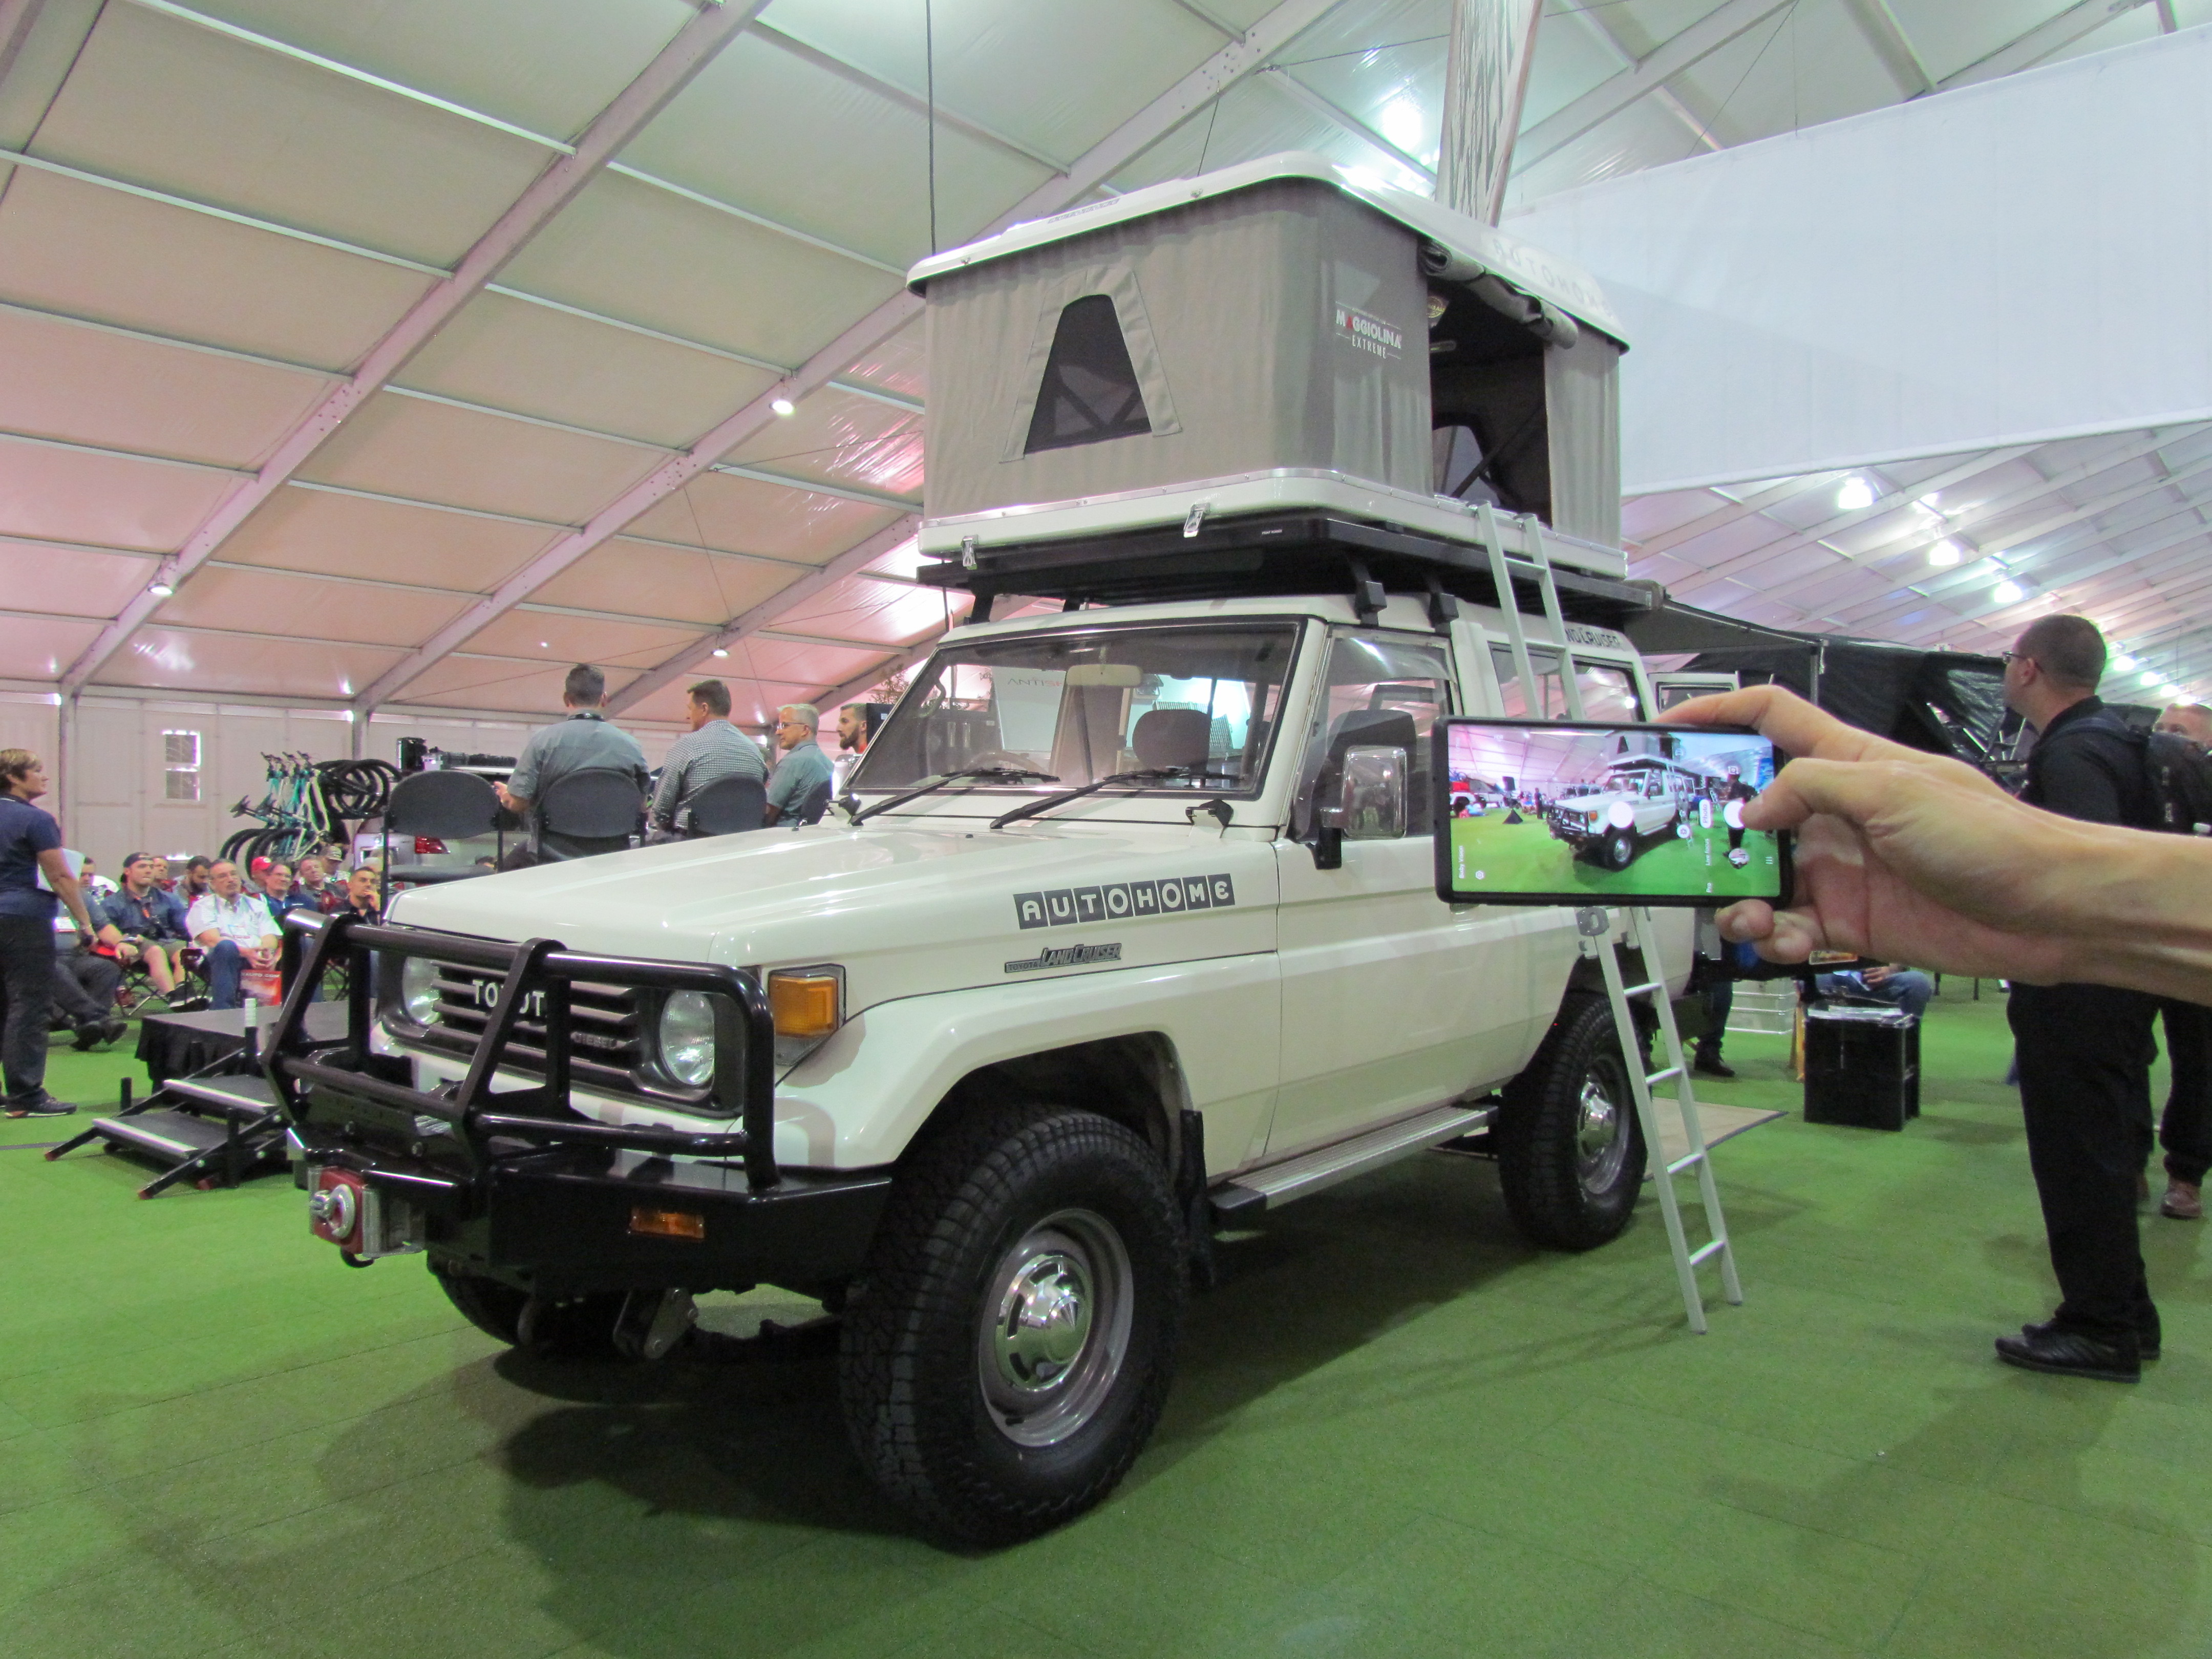 Overlanding, Trending: Overlanding takes you off-road and off-ground, ClassicCars.com Journal